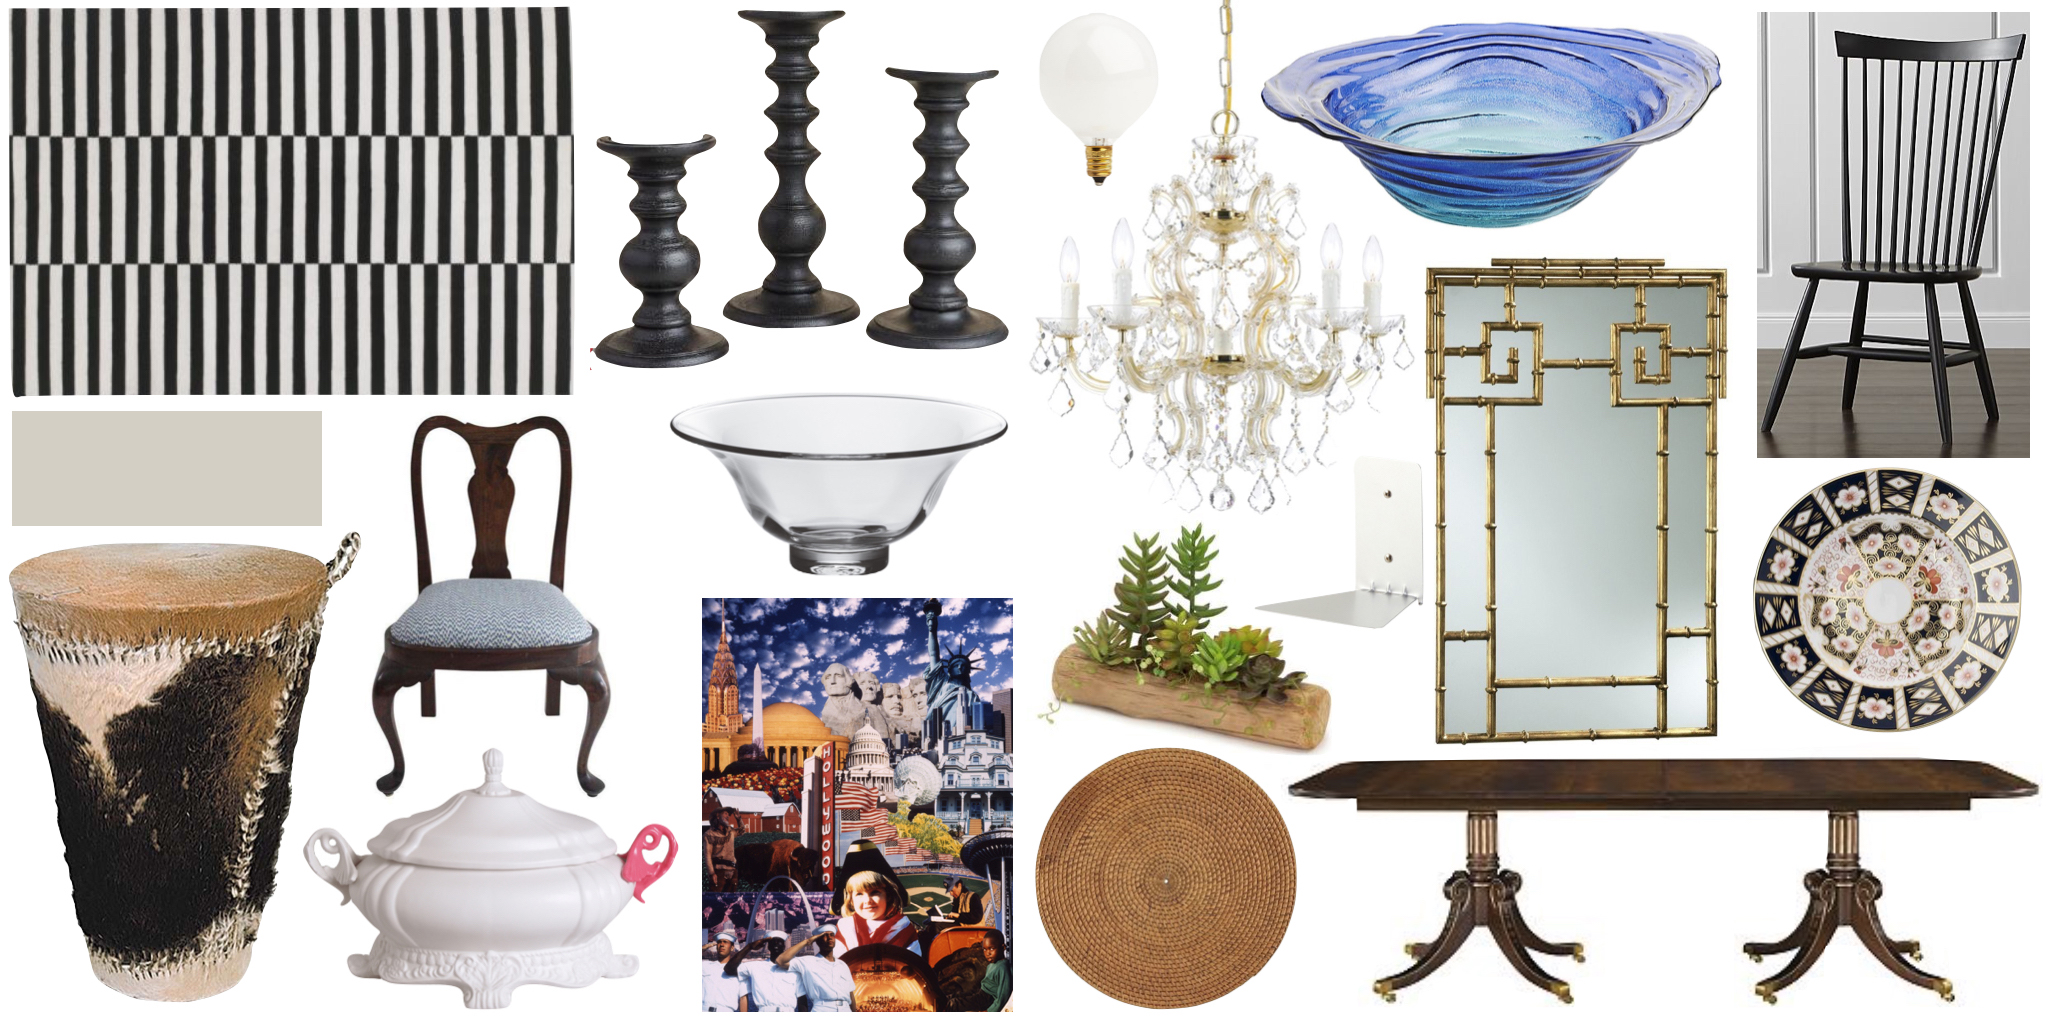 buying guide, featured image, montage, tollett, anne, dining, dining room, accessories, furniture, lighting, art